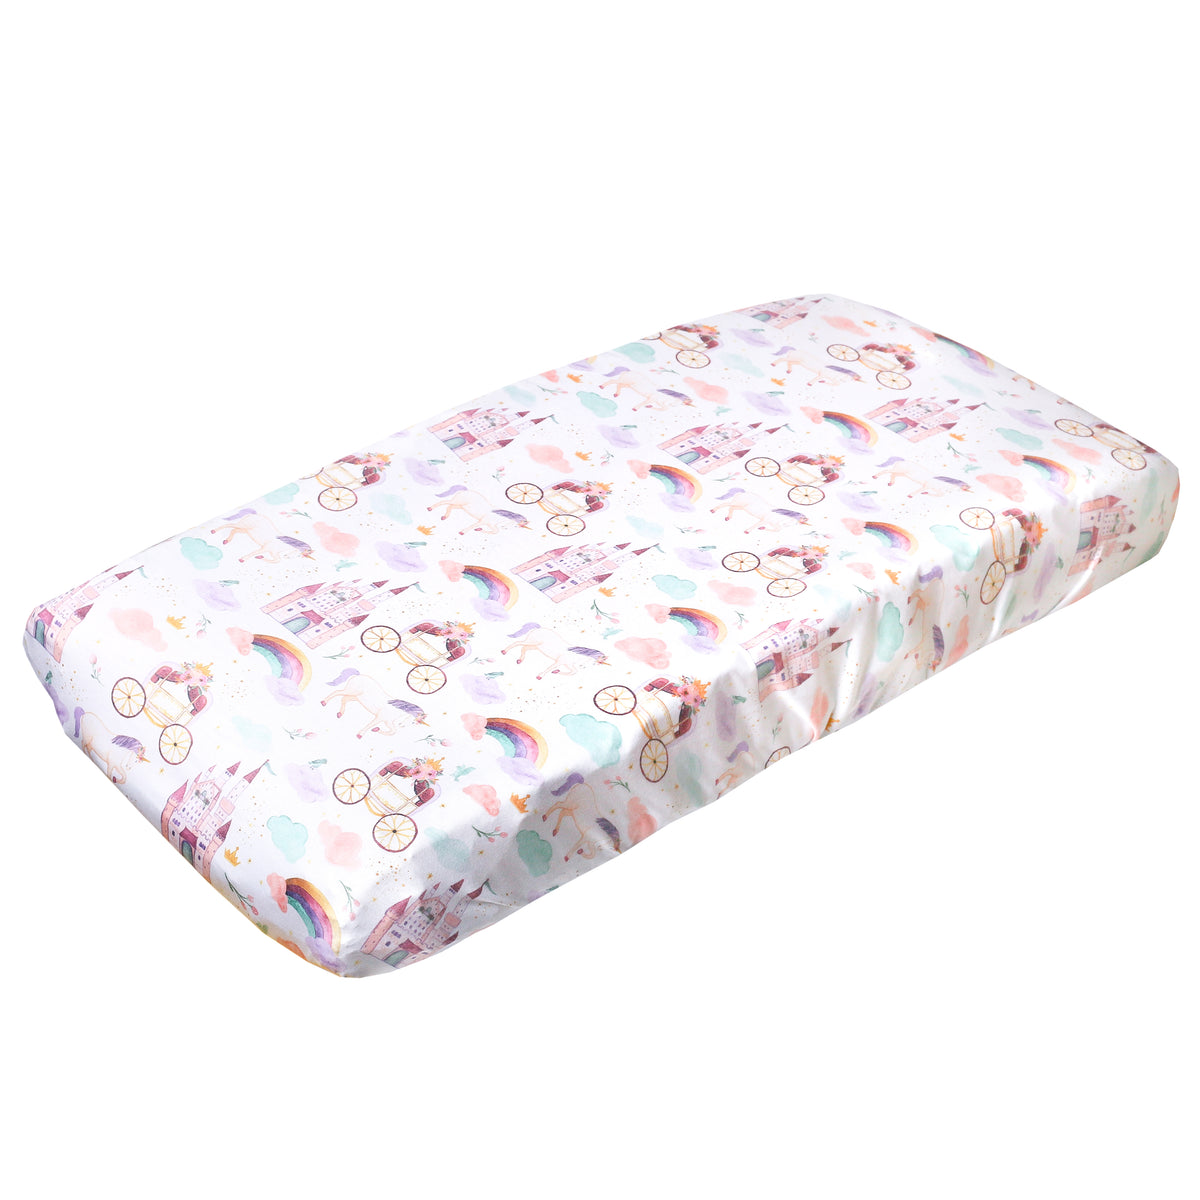 Premium Knit Diaper Changing Pad Cover - Enchanted